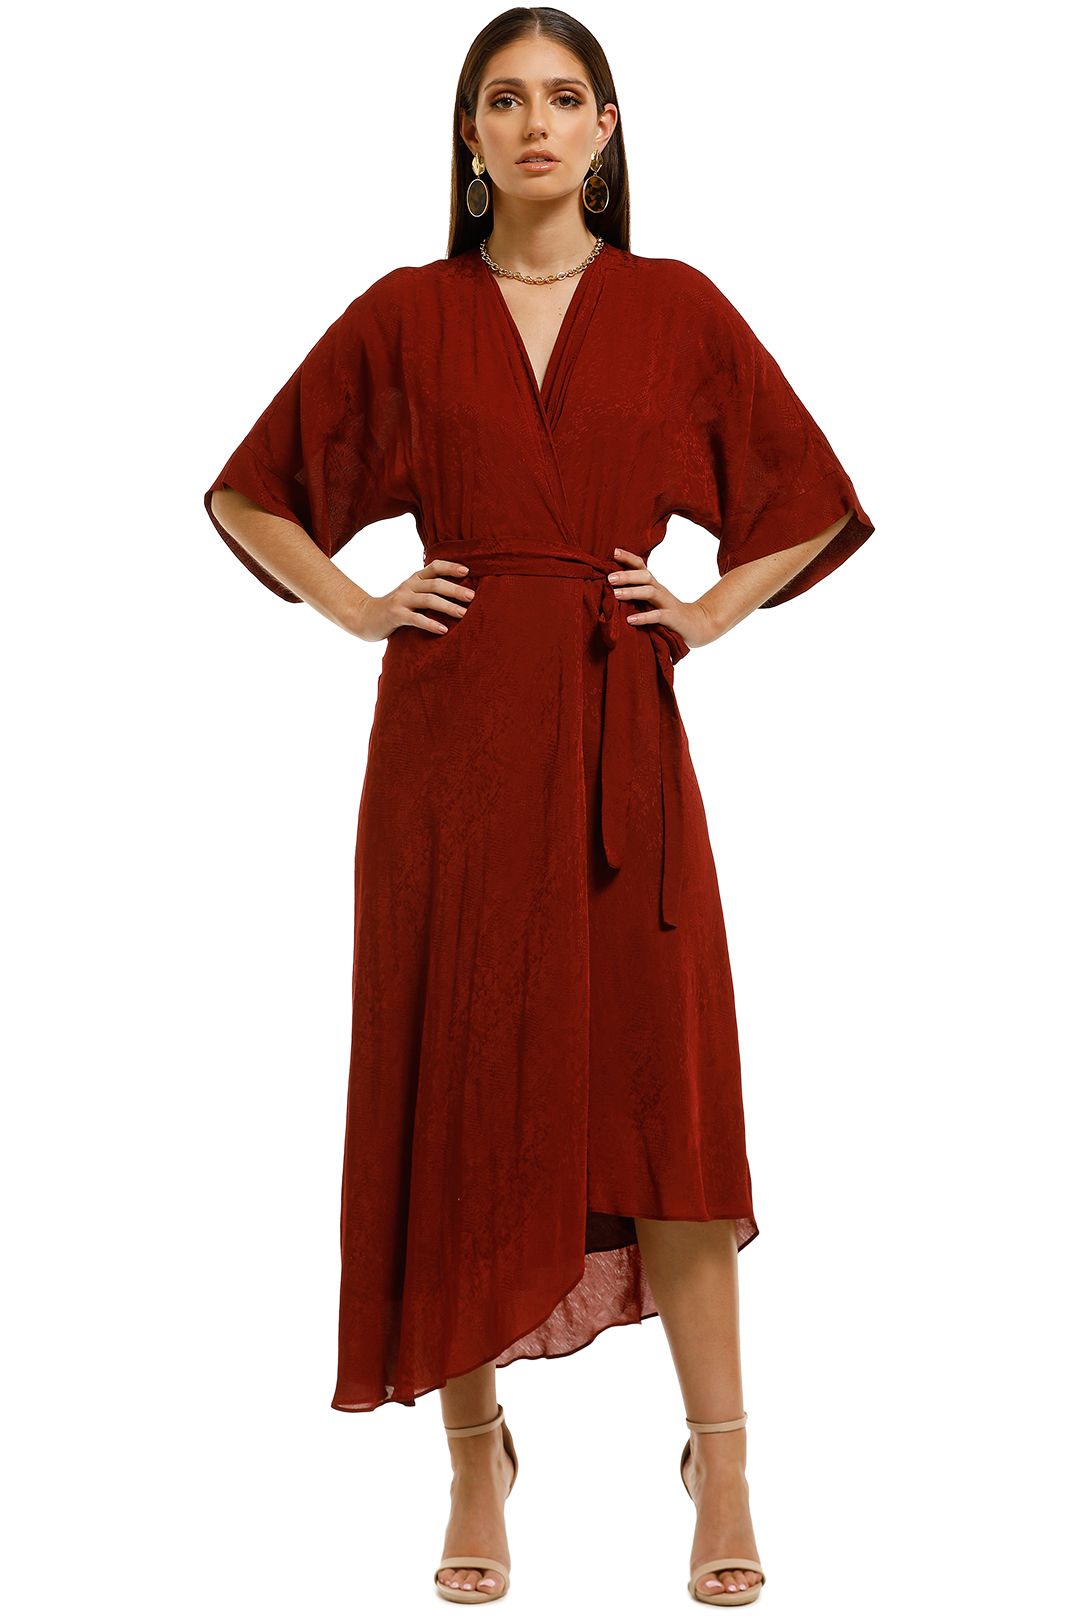 Panacea Wrap Dress in Rust by Ginger and Smart for Hire | GlamCorner